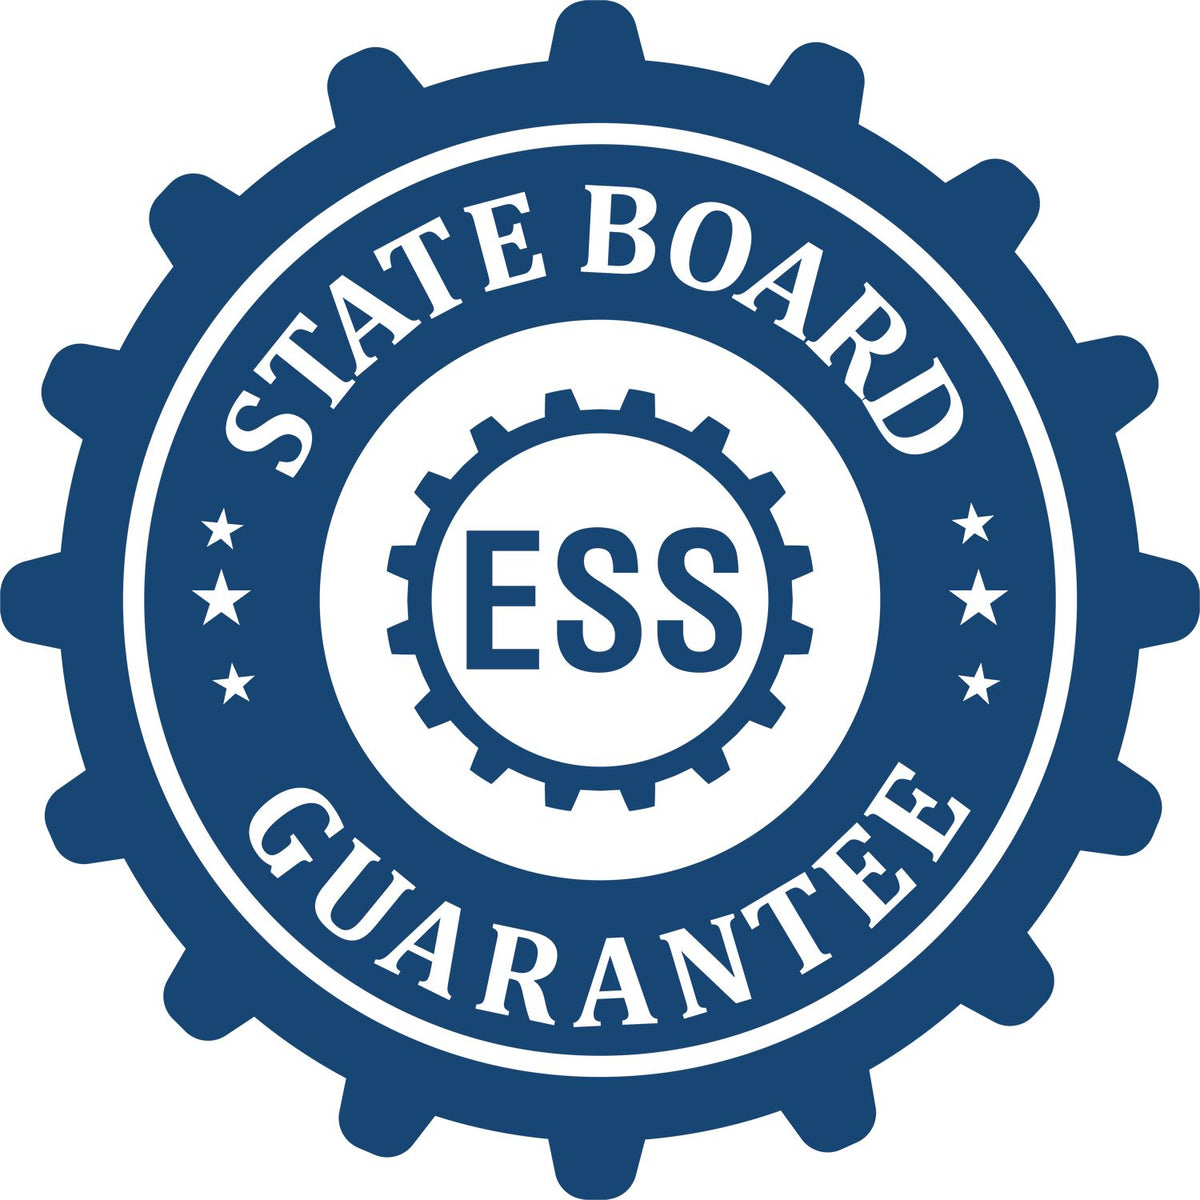 An emblem in a gear shape illustrating a state board guarantee for the State of Oregon Extended Long Reach Geologist Seal